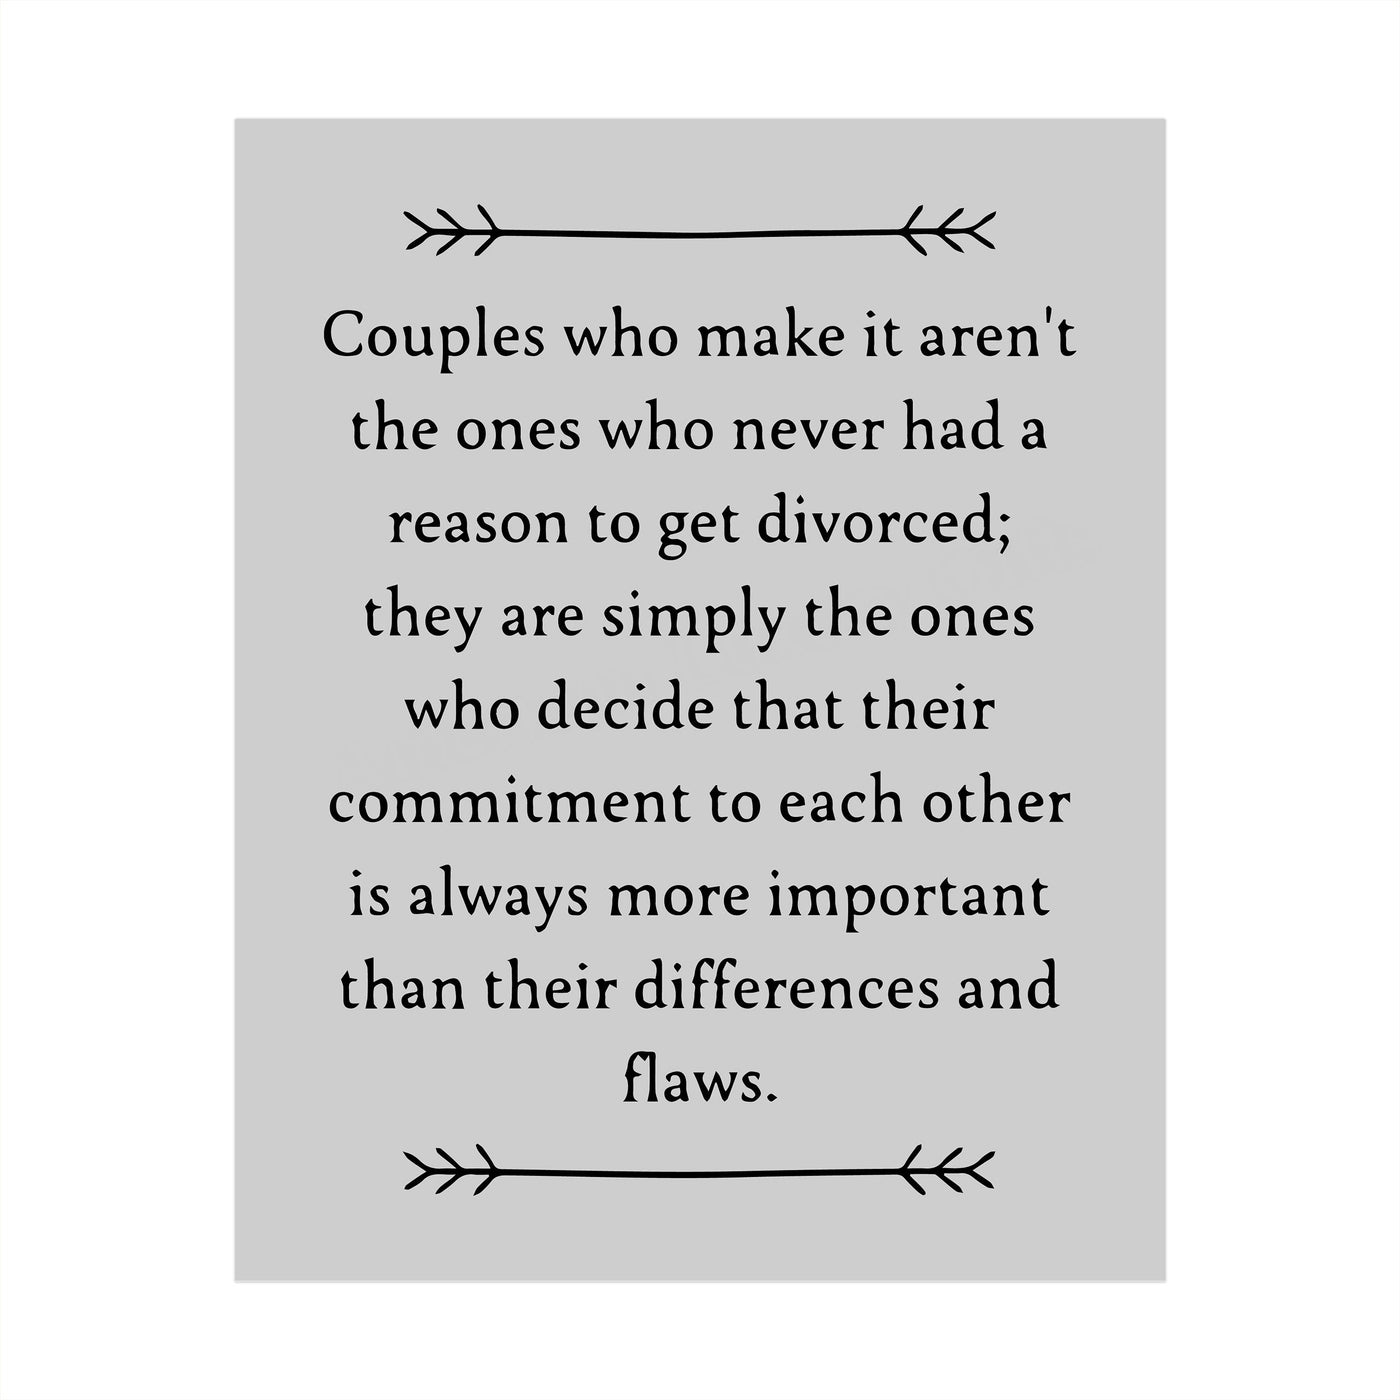 Couples Who Make It Decide Commitment More Important Inspirational Love & Marriage Wall Art-8 x 10" Typographic Print-Ready to Frame. Perfect Wedding-Anniversary Gift! Great Advice for Newlyweds!